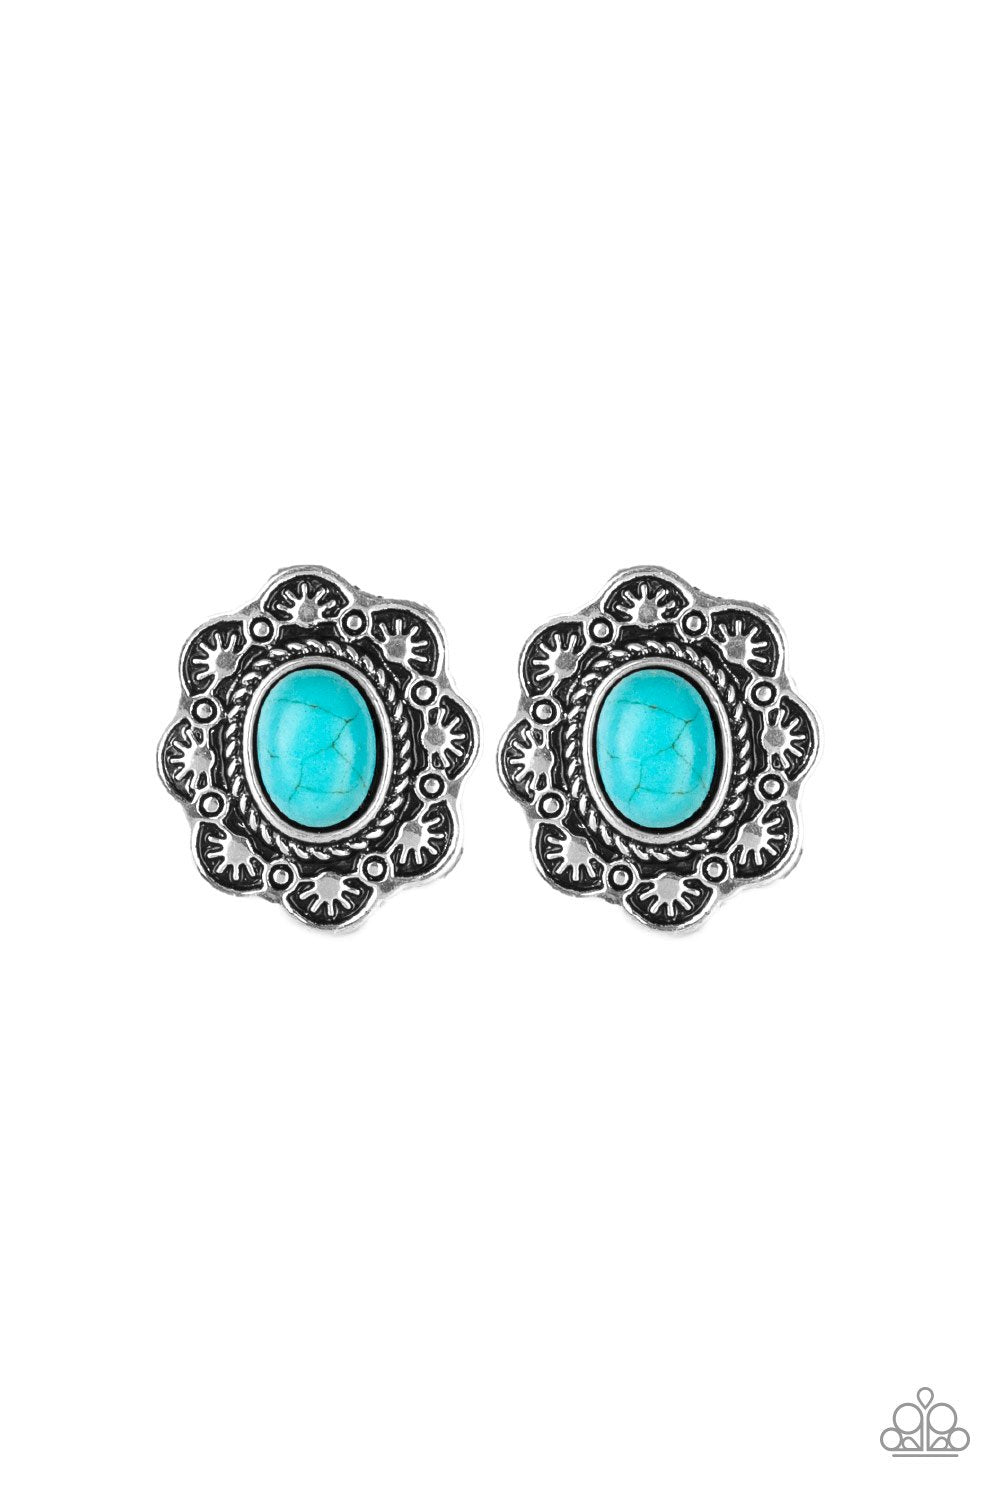 Springtime Deserts Turquoise Blue Stone Flower Post Earrings - Paparazzi Accessories - lightbox -CarasShop.com - $5 Jewelry by Cara Jewels